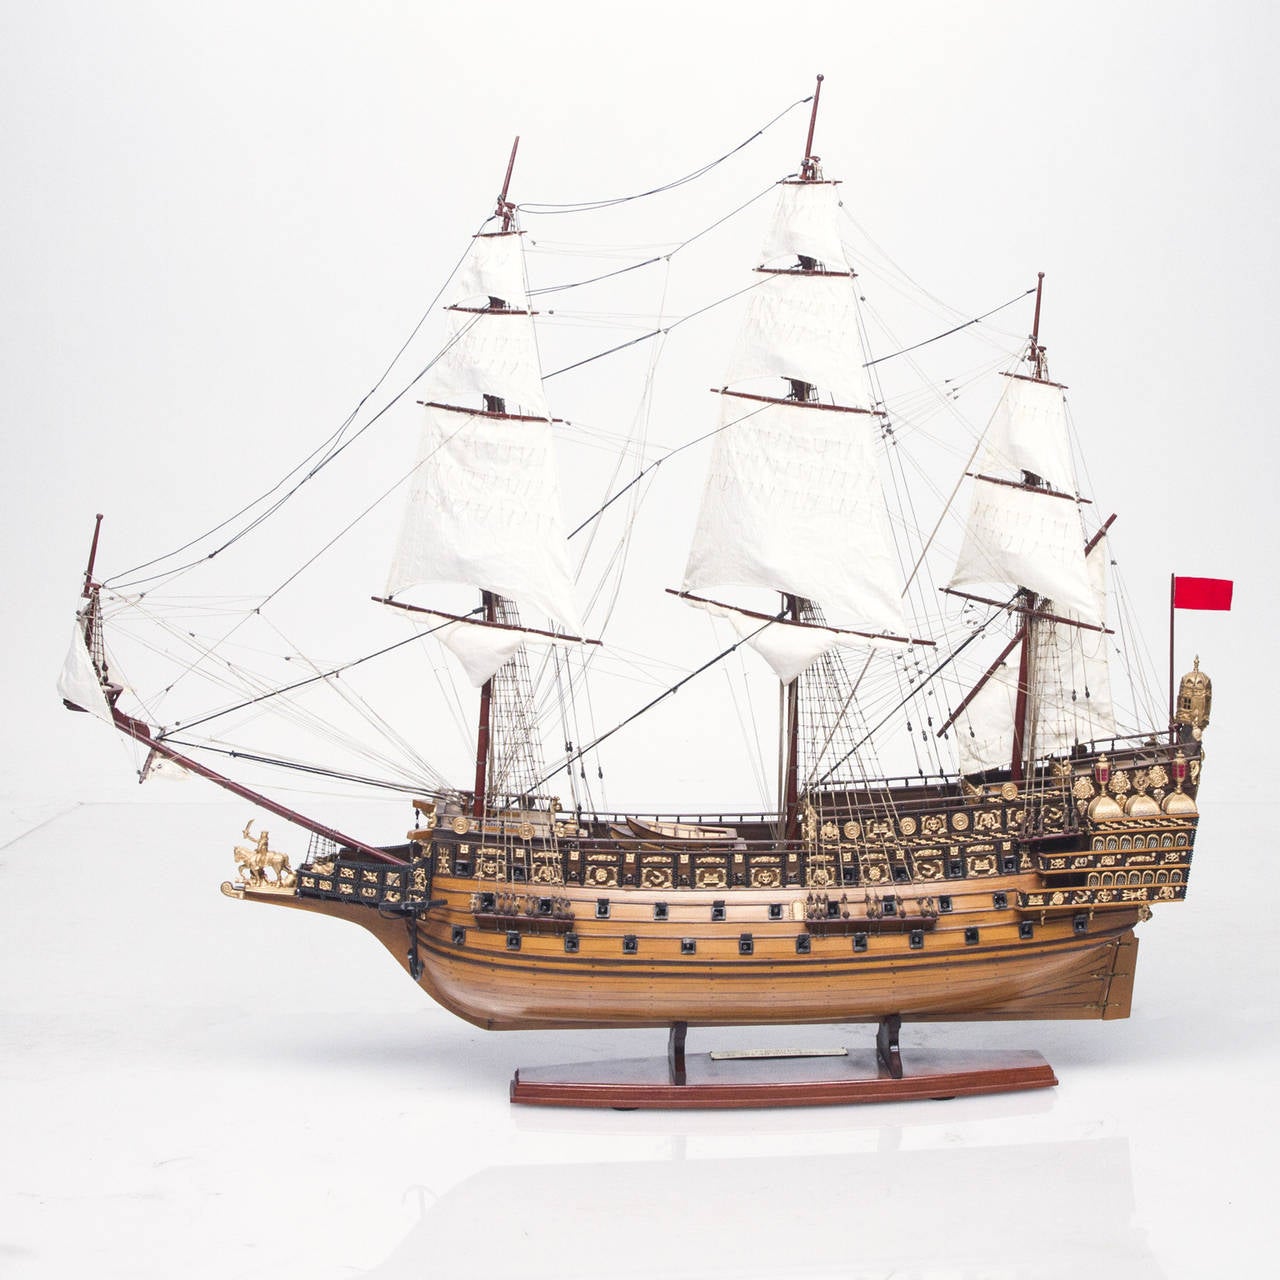 American Craftsman Model HMS Sovereign of the Sea